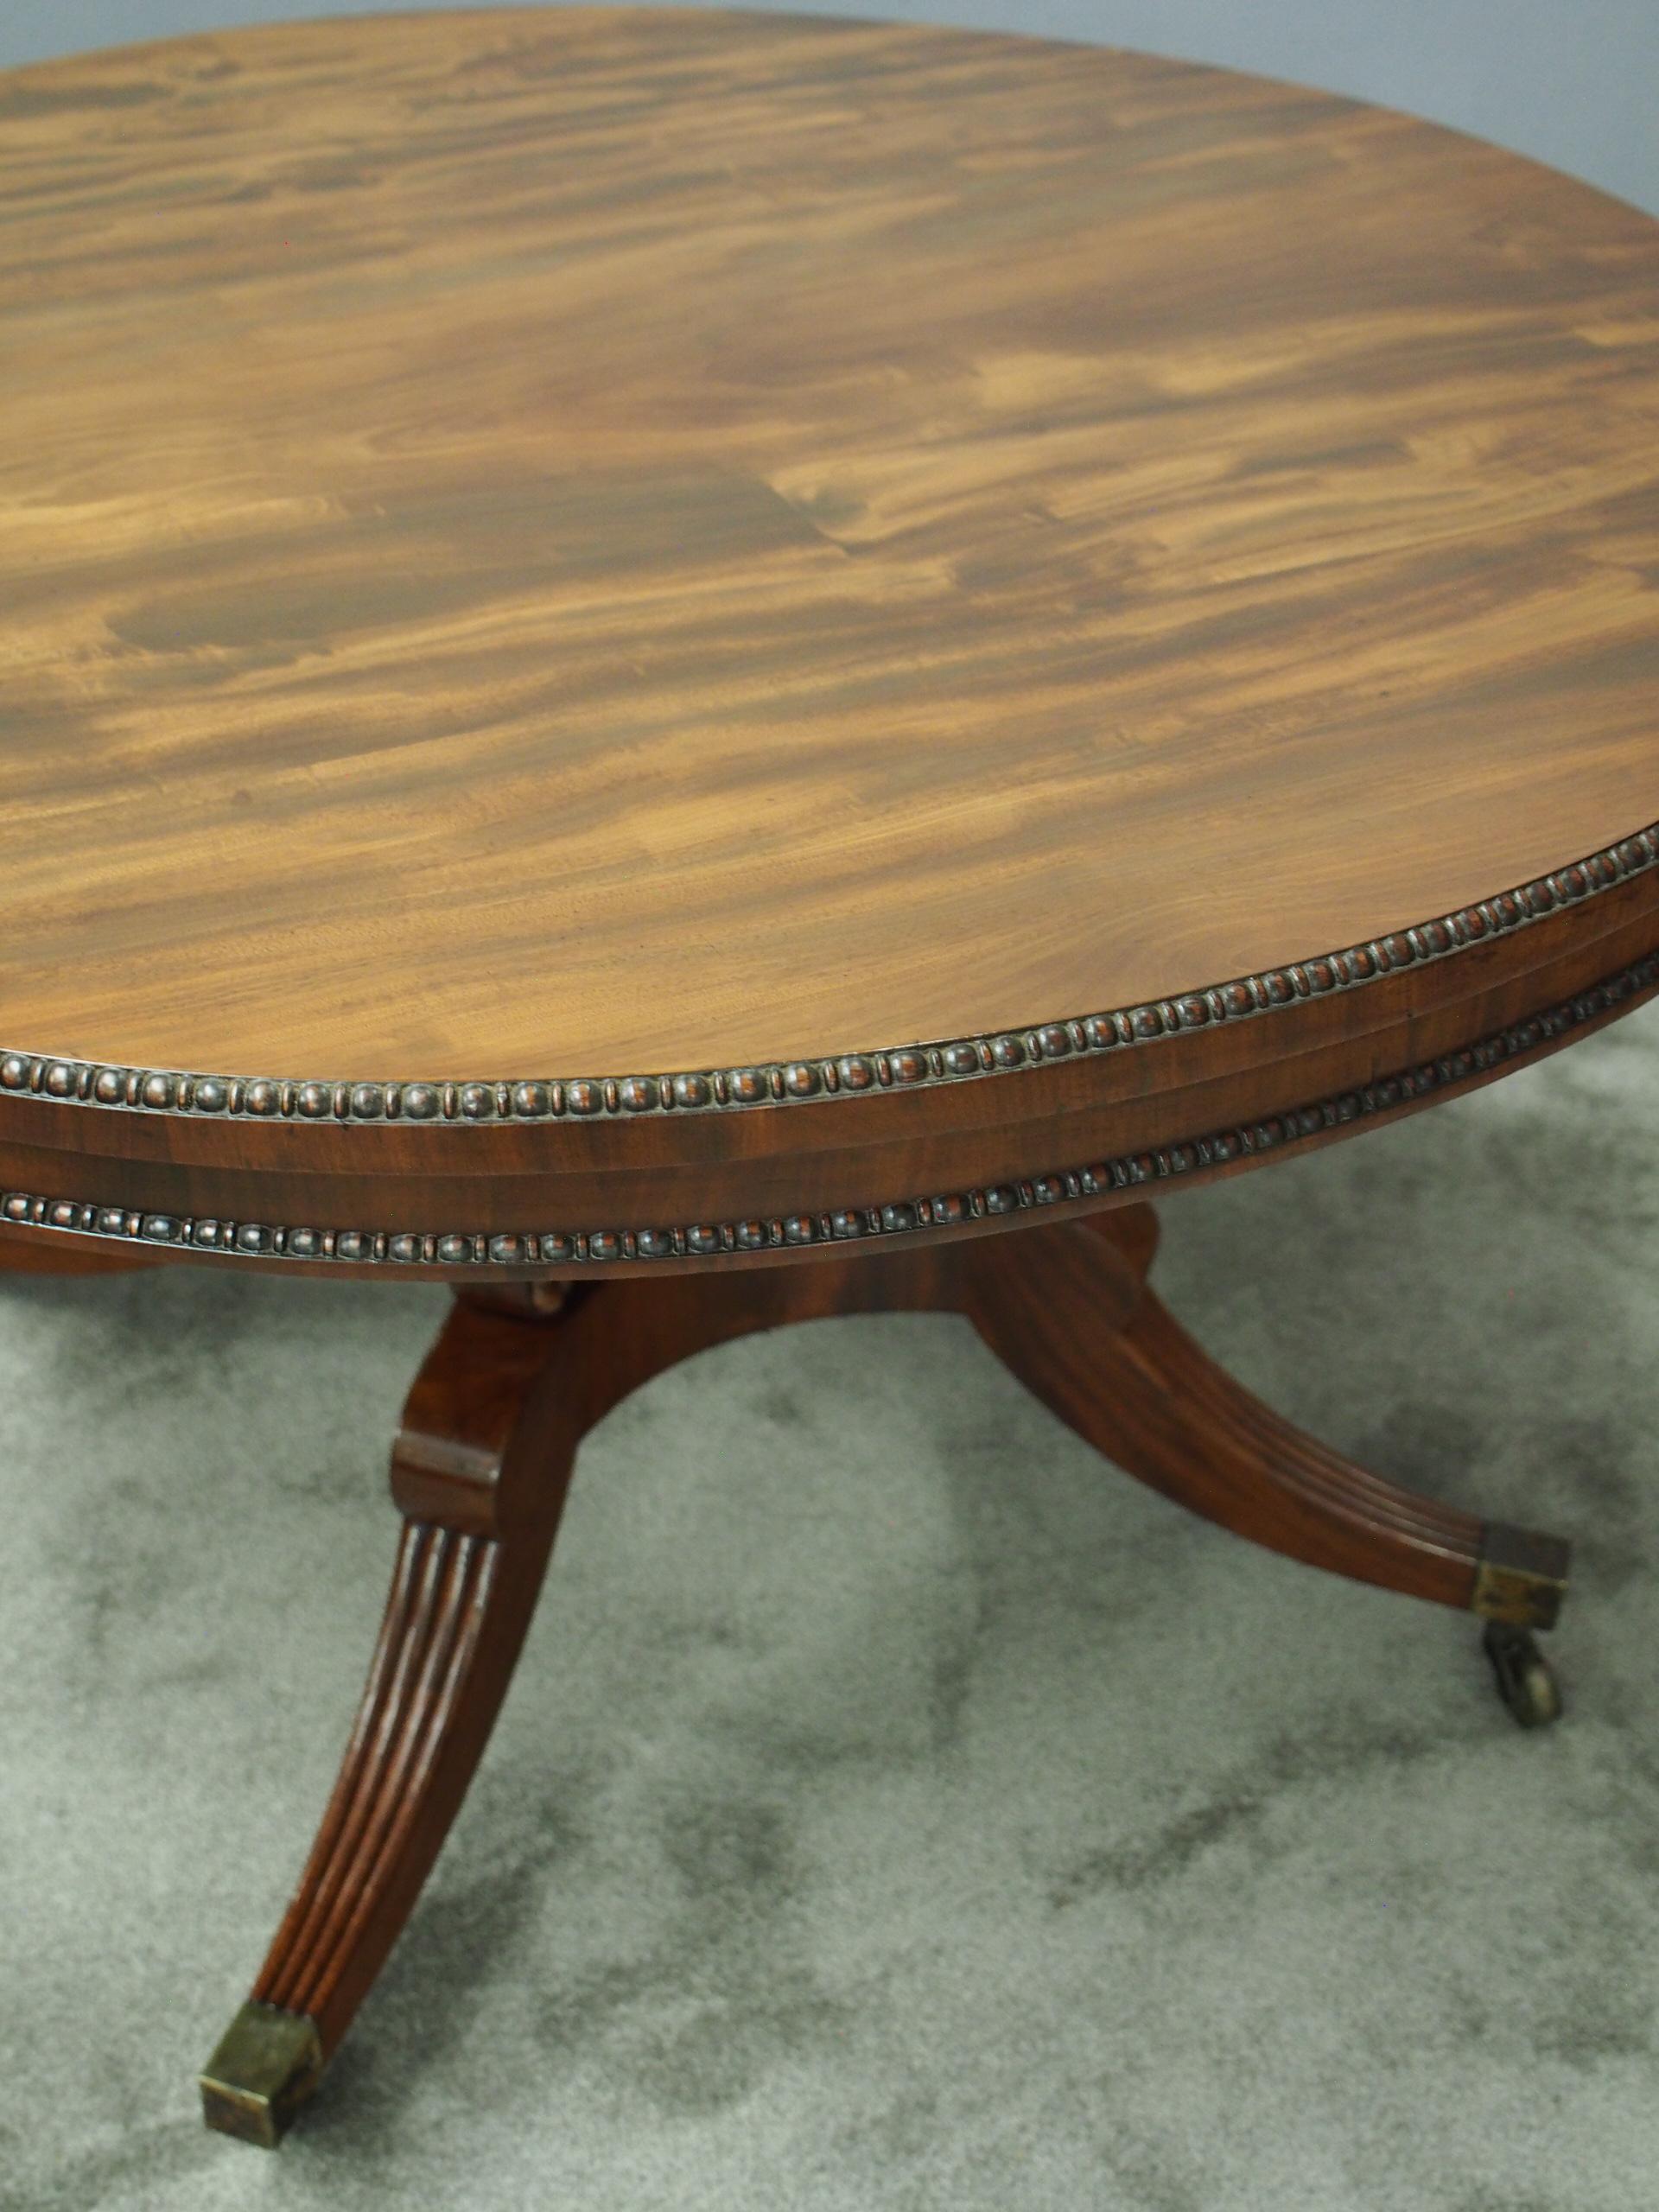 Regency William Trotter Style Mahogany Breakfast Table For Sale 3